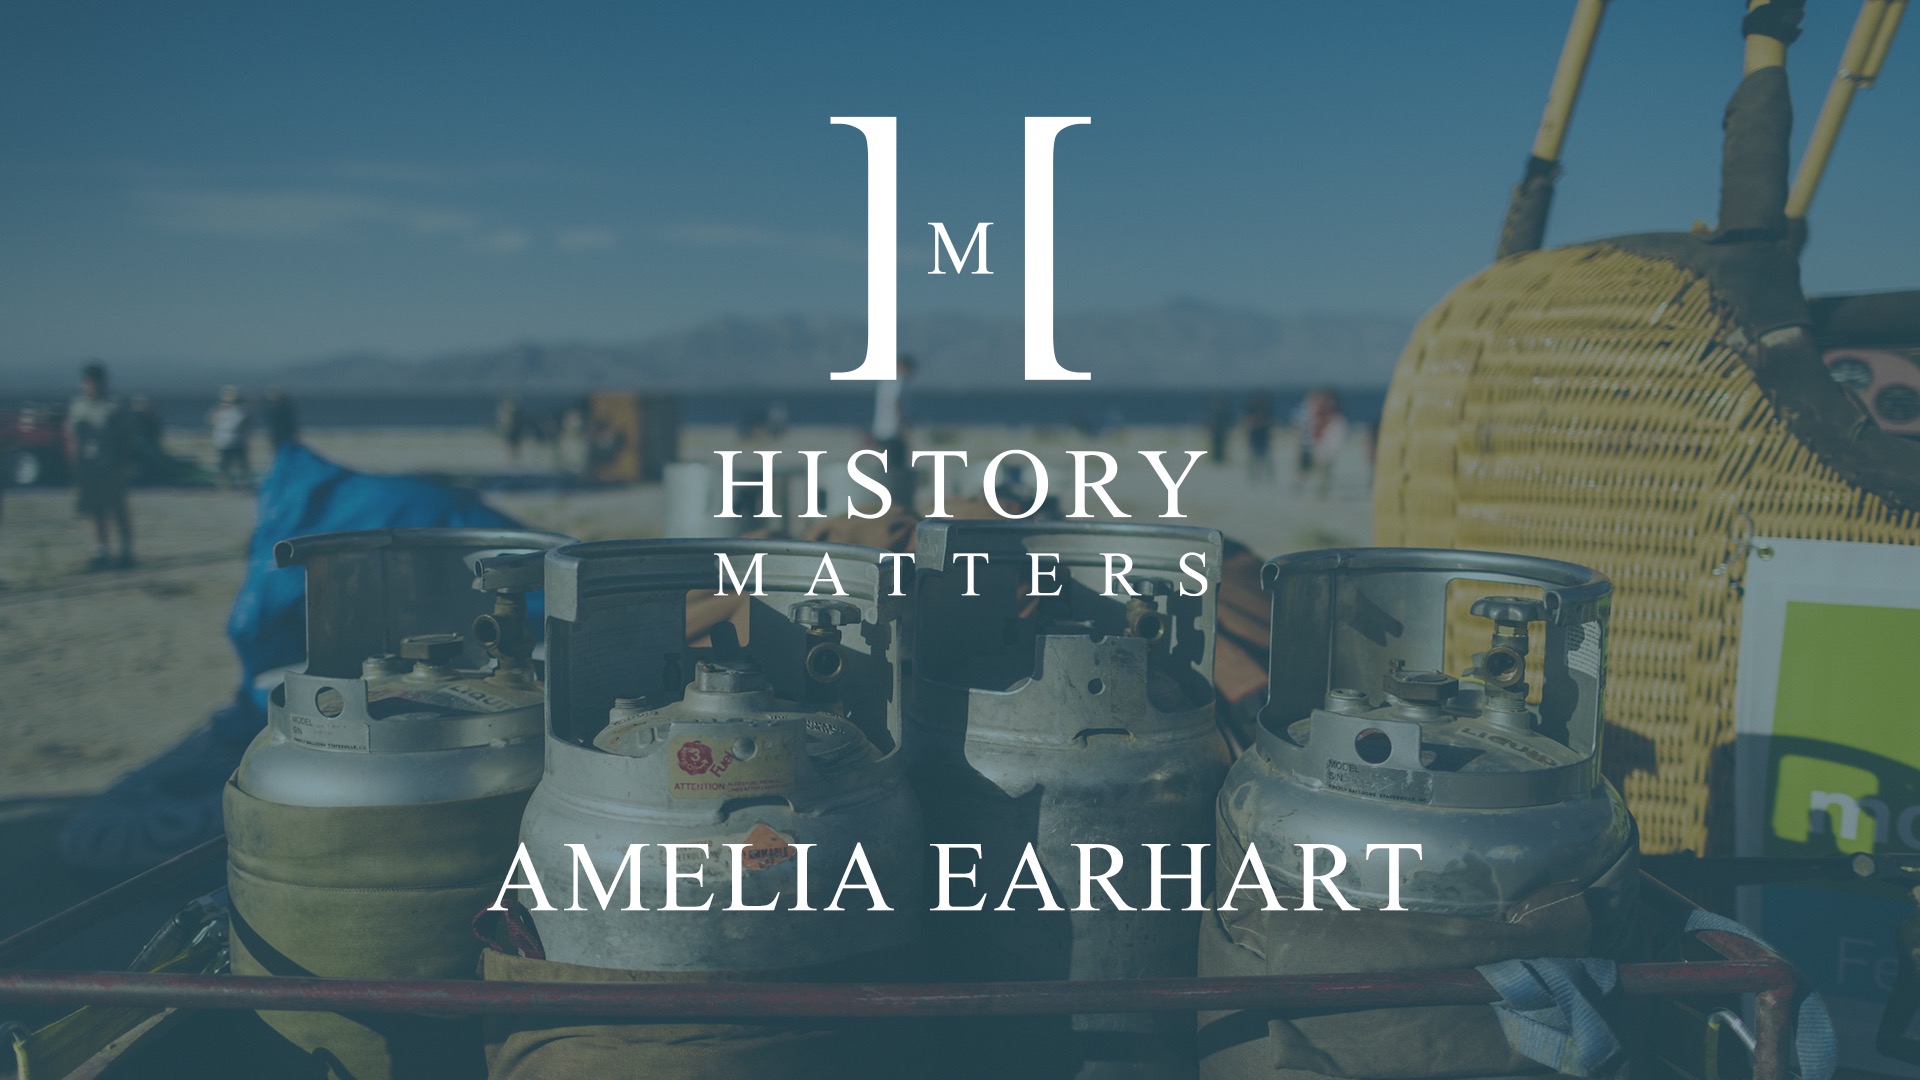 White HM Amelia Earhart logo with background of four fuel metal cannisters by a hot air balloon